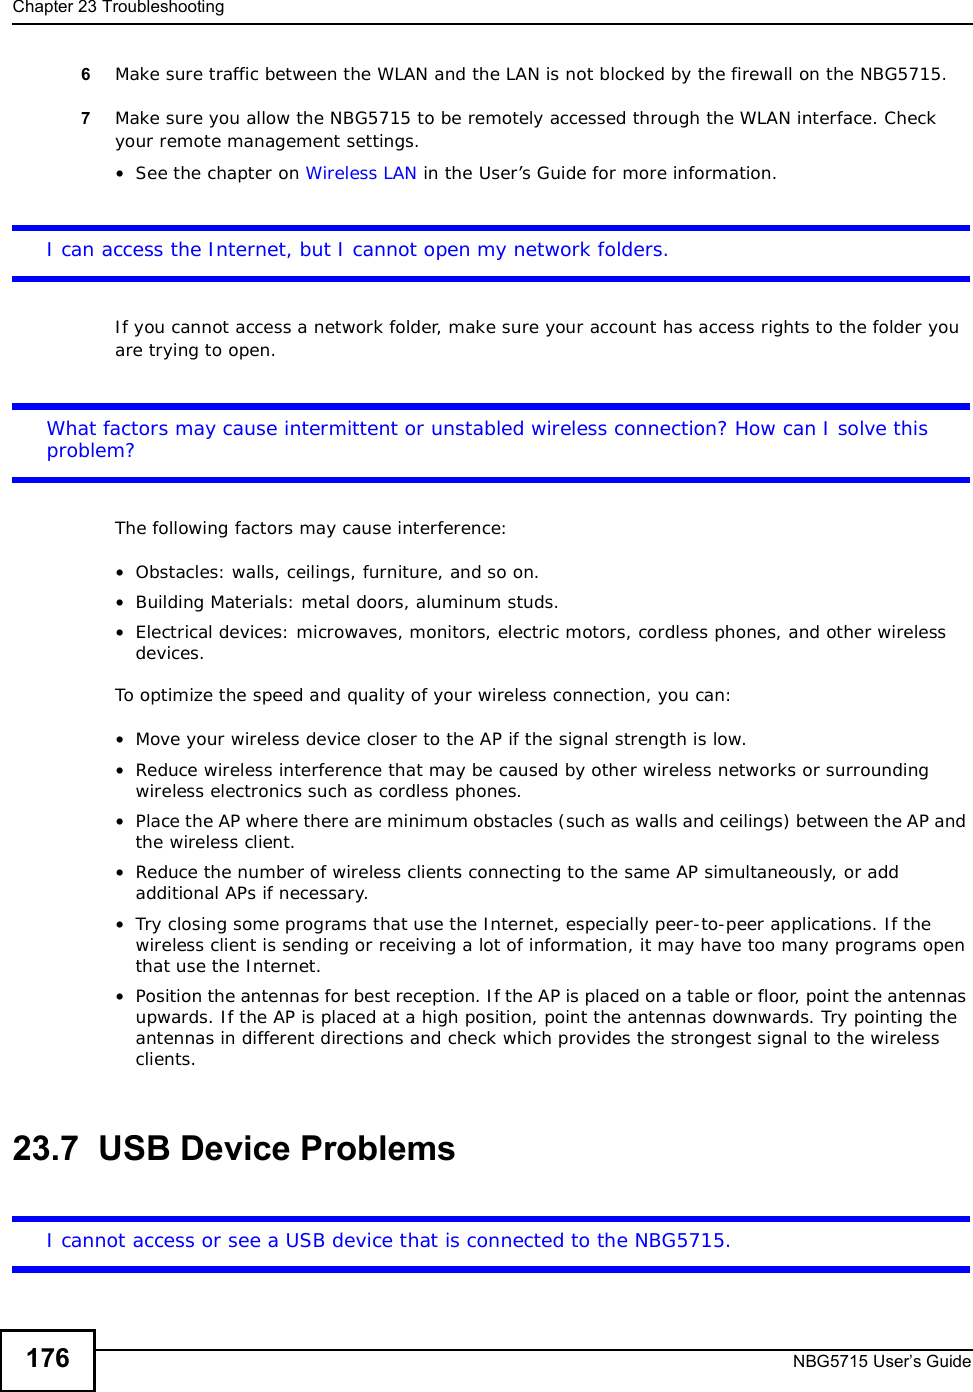 Chapter 23TroubleshootingNBG5715 User’s Guide1766Make sure traffic between the WLAN and the LAN is not blocked by the firewall on the NBG5715. 7Make sure you allow the NBG5715 to be remotely accessed through the WLAN interface. Check your remote management settings.•See the chapter on Wireless LAN in the User’s Guide for more information.I can access the Internet, but I cannot open my network folders.If you cannot access a network folder, make sure your account has access rights to the folder you are trying to open.What factors may cause intermittent or unstabled wireless connection? How can I solve this problem?The following factors may cause interference:•Obstacles: walls, ceilings, furniture, and so on.•Building Materials: metal doors, aluminum studs.•Electrical devices: microwaves, monitors, electric motors, cordless phones, and other wireless devices.To optimize the speed and quality of your wireless connection, you can:•Move your wireless device closer to the AP if the signal strength is low.•Reduce wireless interference that may be caused by other wireless networks or surrounding wireless electronics such as cordless phones.•Place the AP where there are minimum obstacles (such as walls and ceilings) between the AP and the wireless client. •Reduce the number of wireless clients connecting to the same AP simultaneously, or add additional APs if necessary.•Try closing some programs that use the Internet, especially peer-to-peer applications. If the wireless client is sending or receiving a lot of information, it may have too many programs open that use the Internet. •Position the antennas for best reception. If the AP is placed on a table or floor, point the antennas upwards. If the AP is placed at a high position, point the antennas downwards. Try pointing the antennas in different directions and check which provides the strongest signal to the wireless clients.23.7  USB Device ProblemsI cannot access or see a USB device that is connected to the NBG5715.